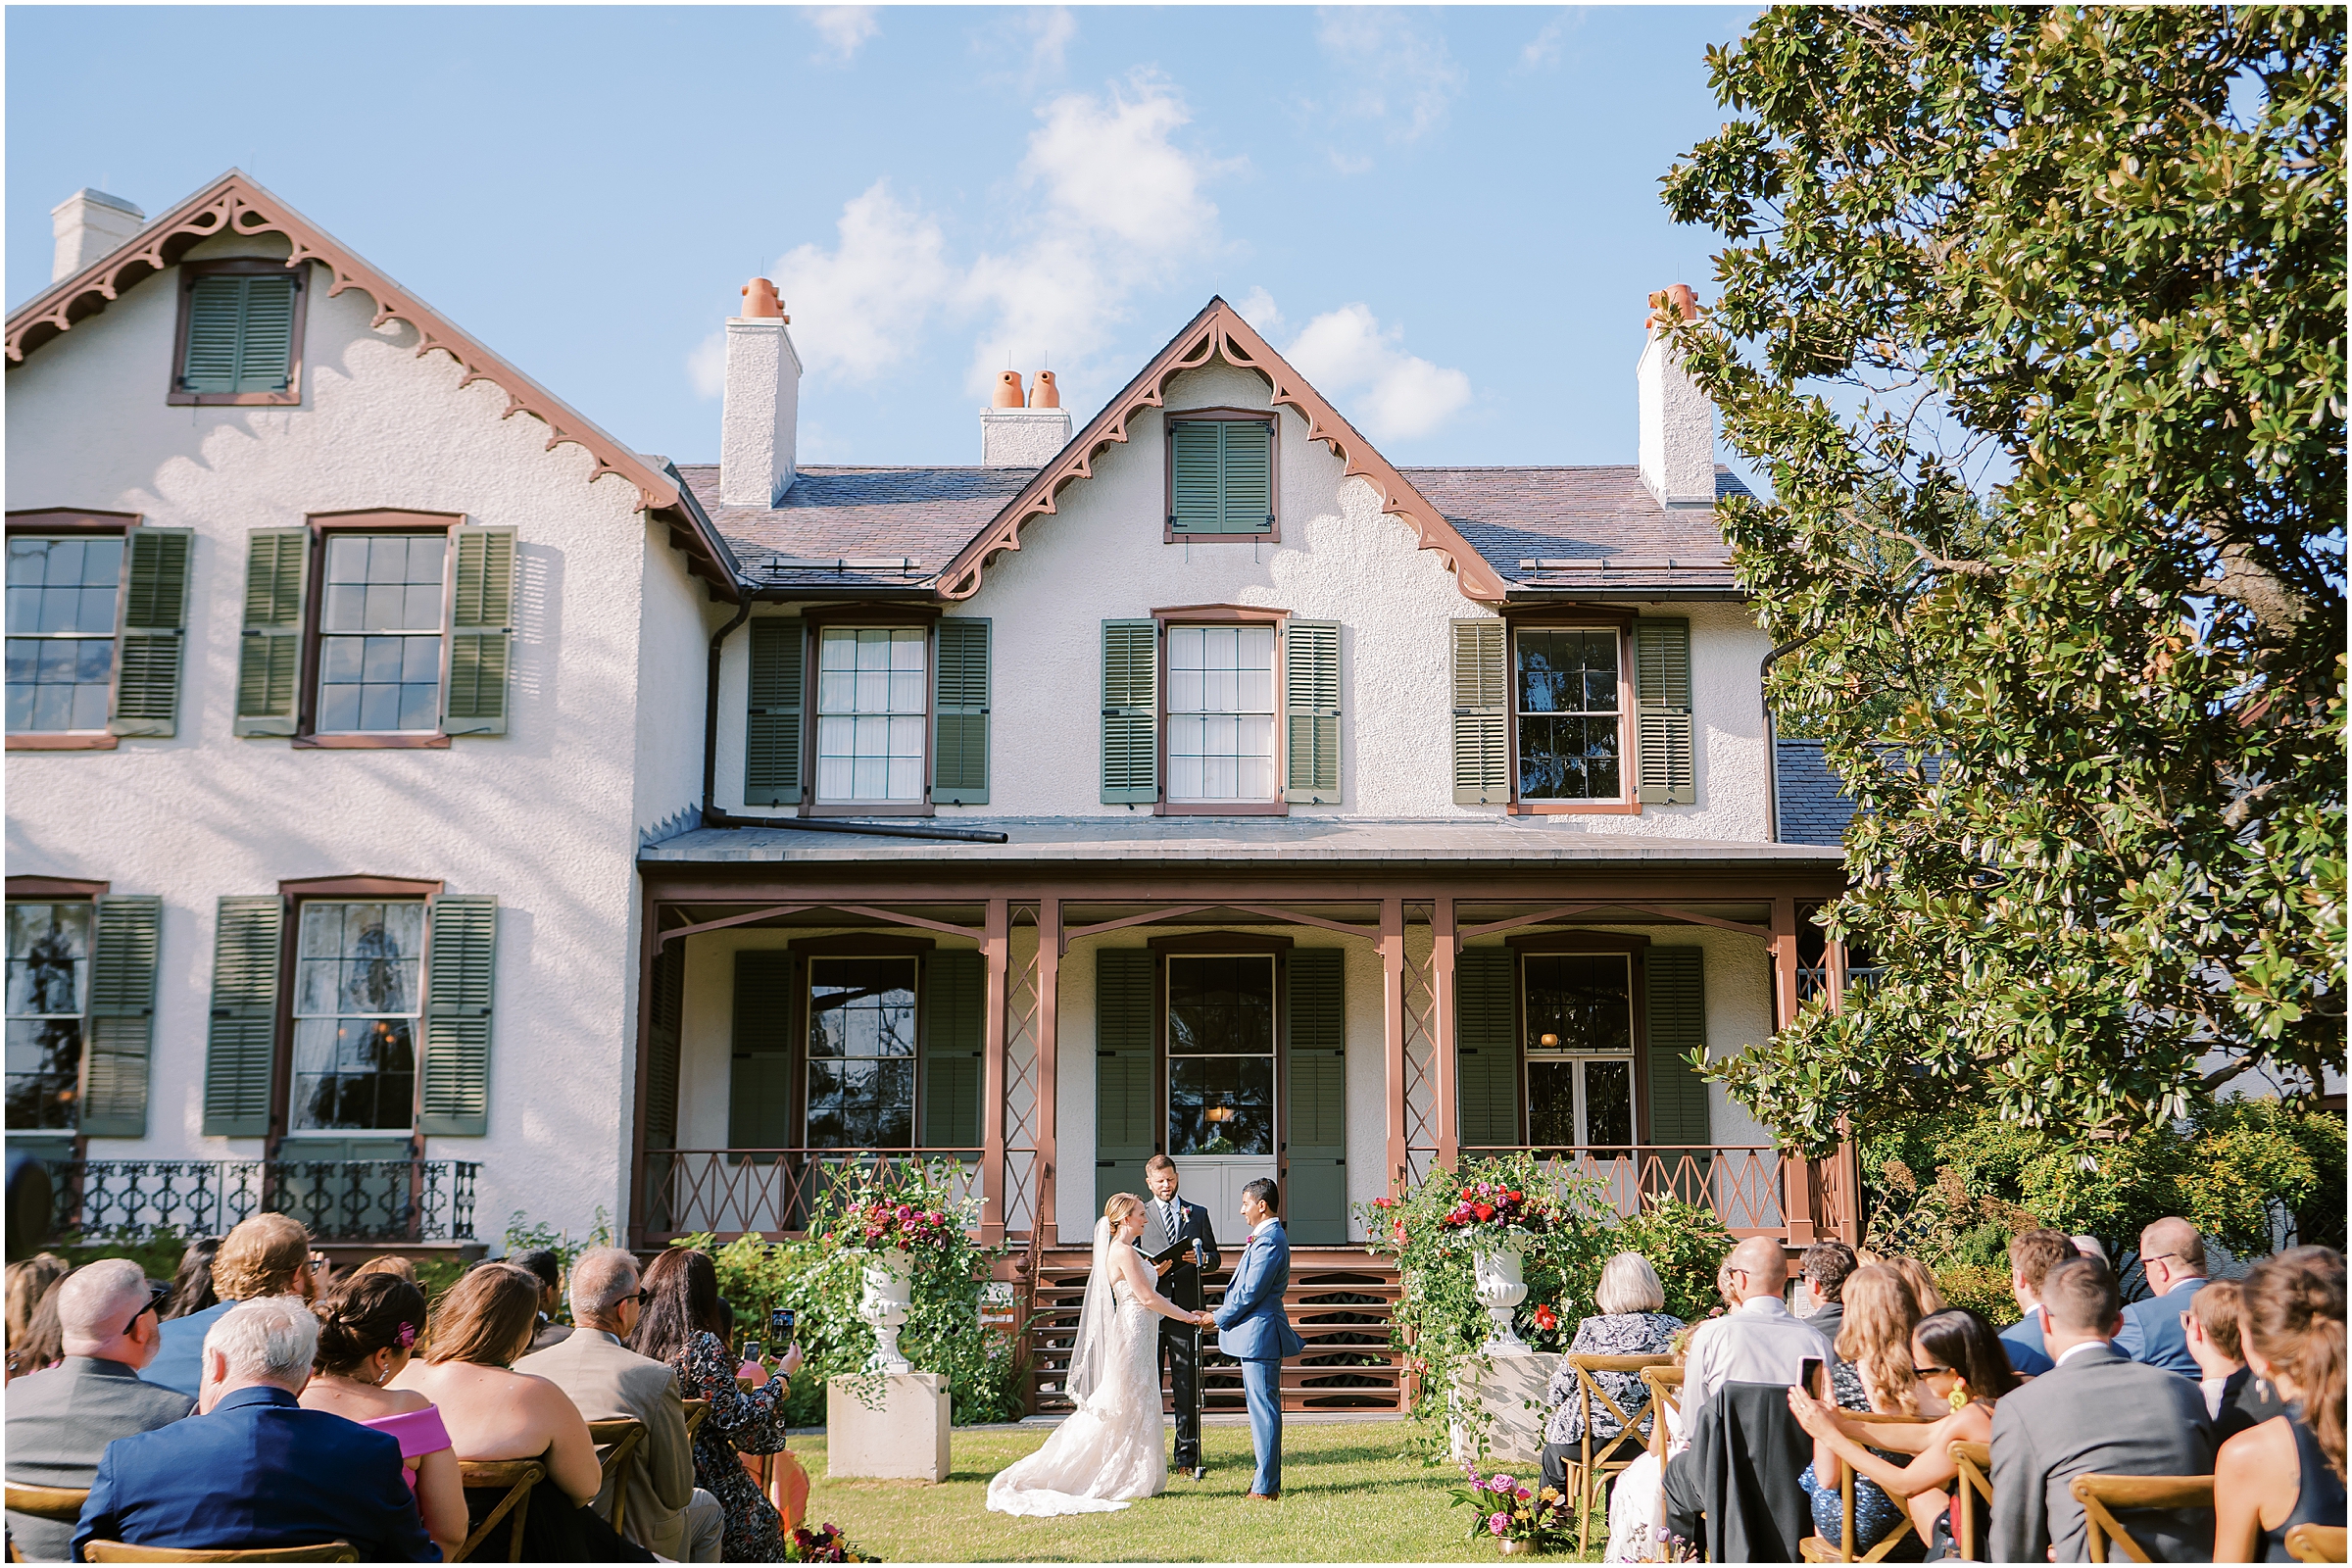 Summer wedding at President Lincoln's Cottage in Washington D.C.